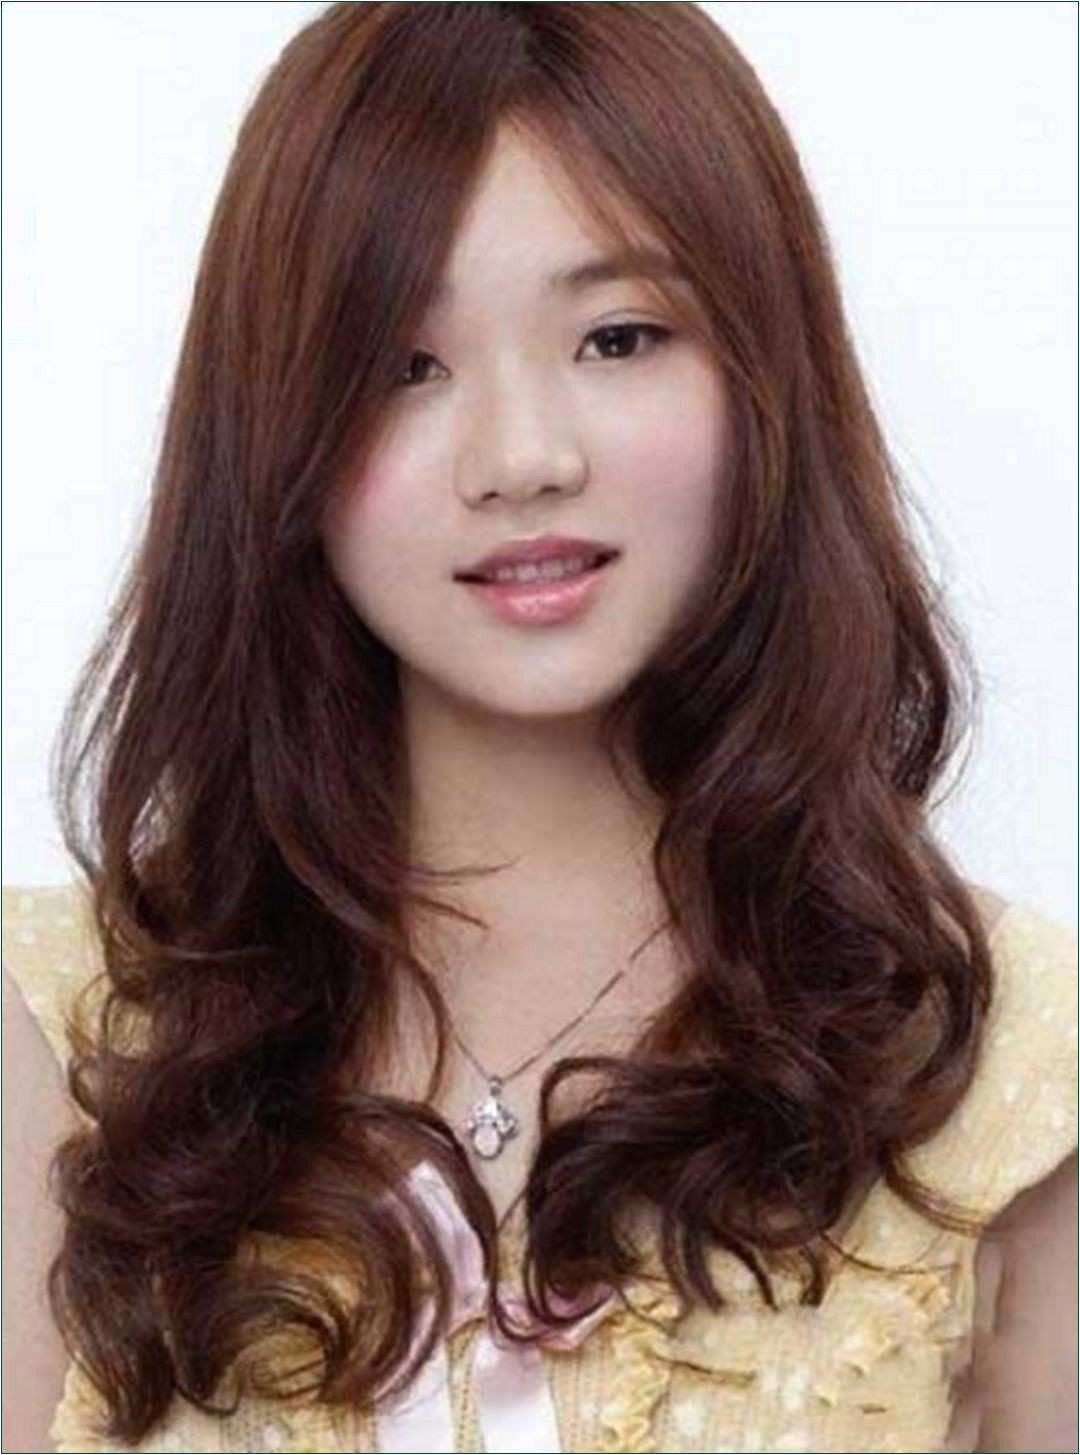 Hairstyle for Round Face asian Cute Z66d 40 Awesome Women Hairstyles for Round Faces Ideas that